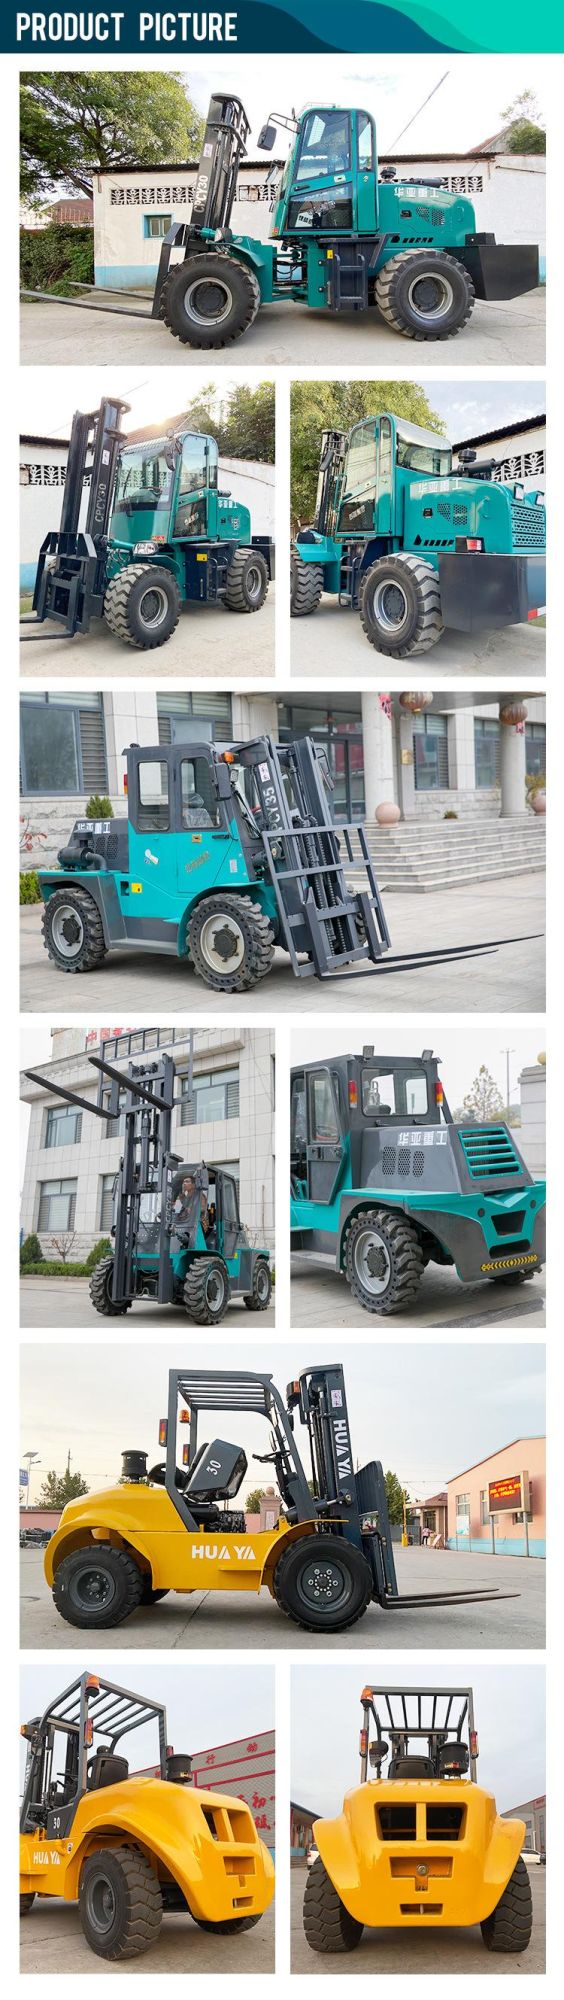 New 2022 Huaya China Offroad Rough Rought Terrain 4WD Forklift Hot FT4*4e